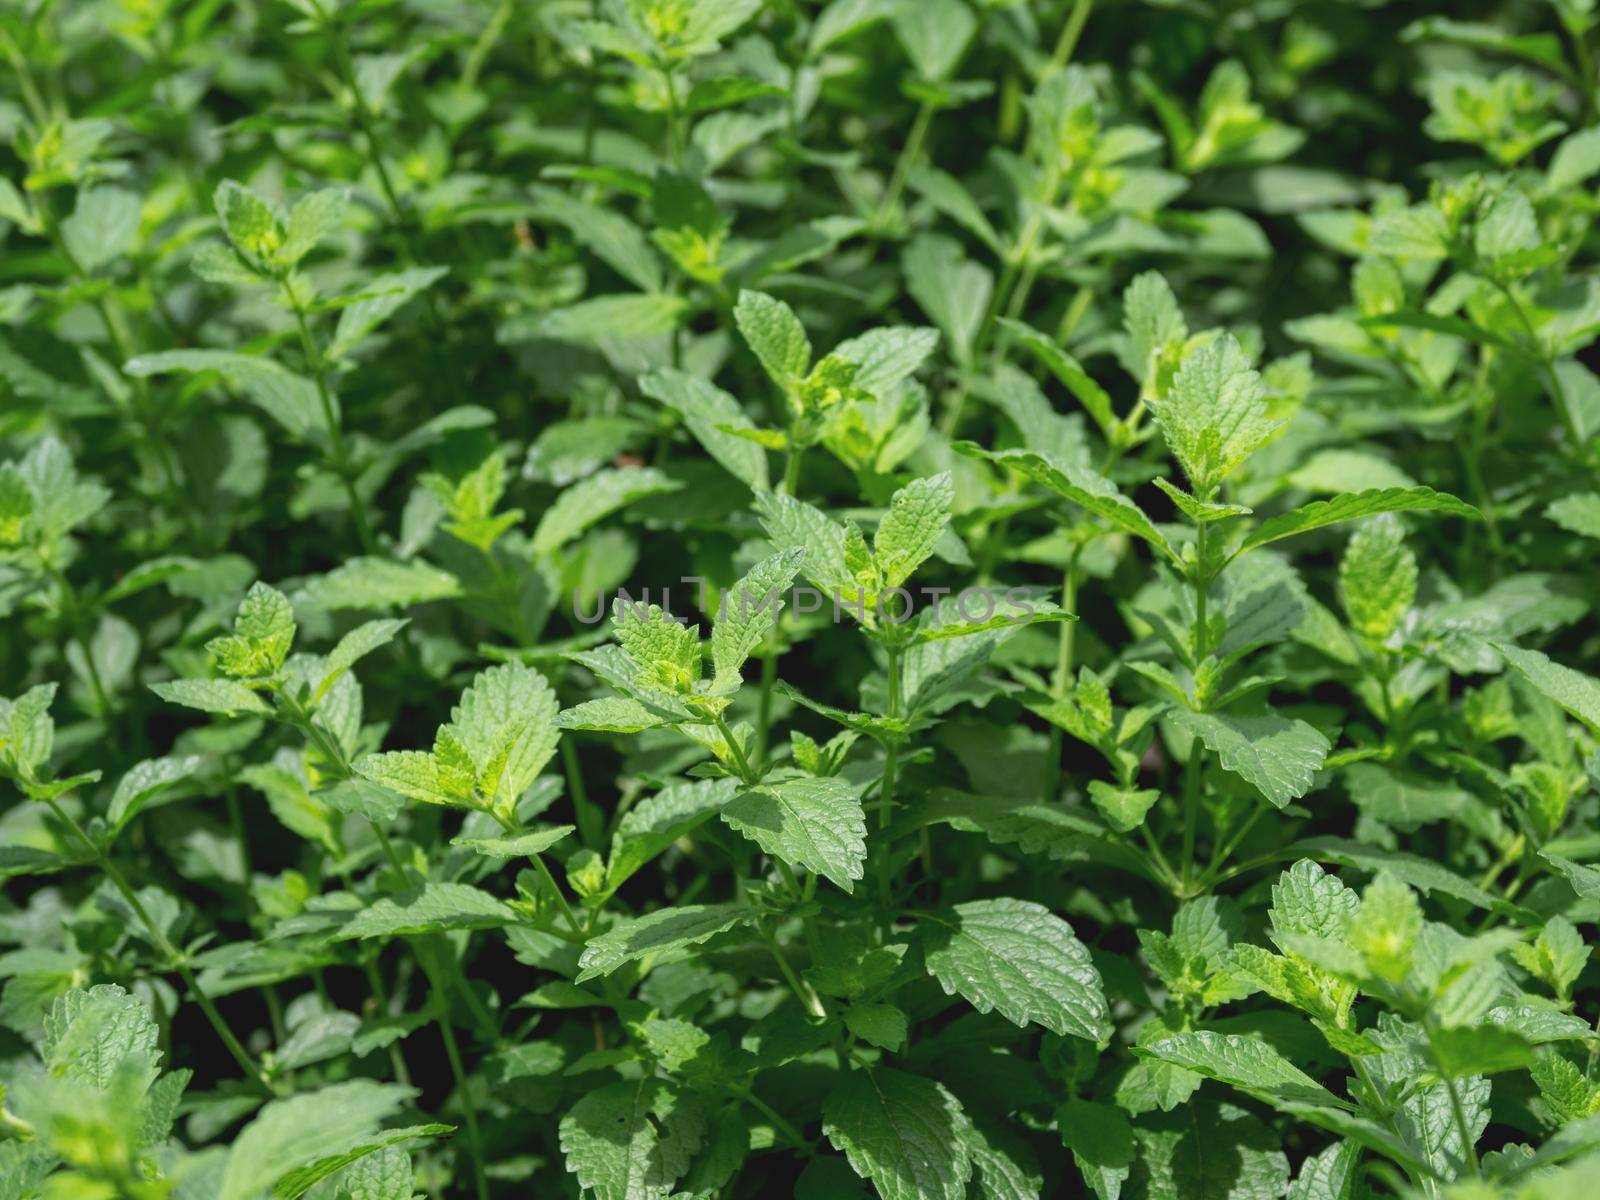 Lemon balm or Melissa officinalis, perennial herbaceous plant in the mint family. Natural summer background with green leaves.